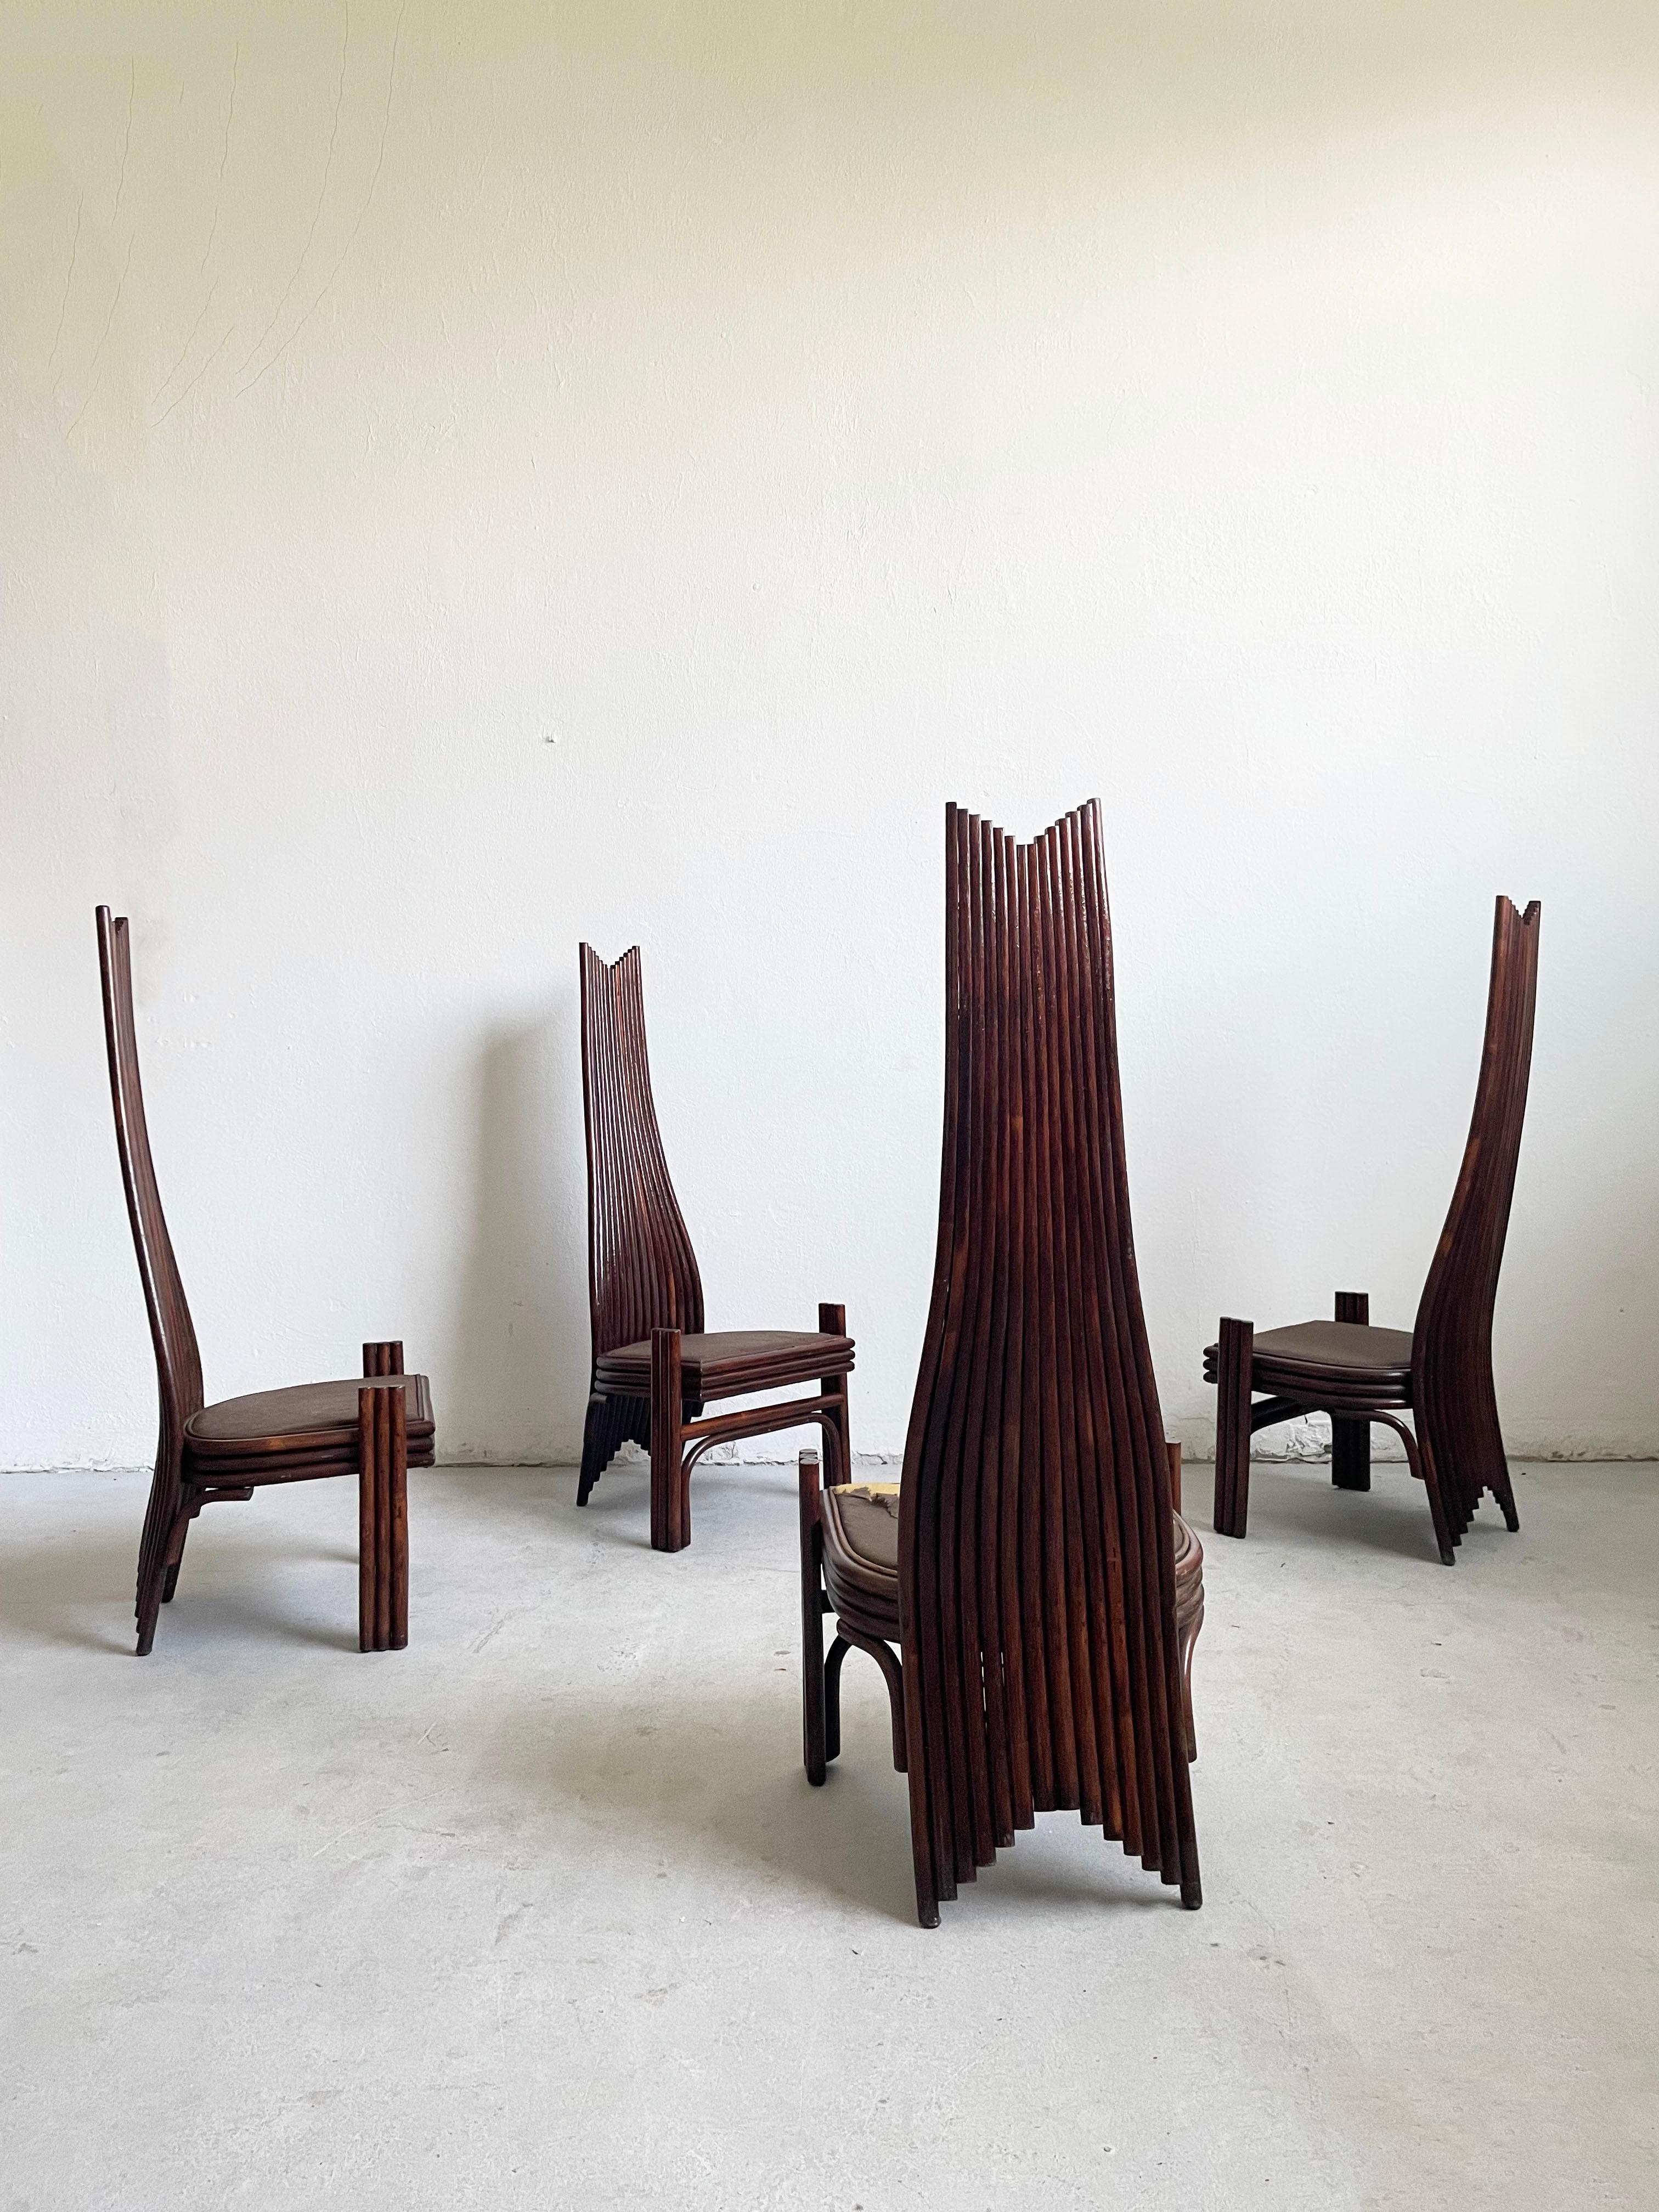 Set of four extravagant dining chairs designed and produced by Mcguire in the USA in the 1980s. 

This design is often attributed to Danny Ho Fong. 

The chairs are constructed of dark brown stained bamboo, and have a very high curved back.

The